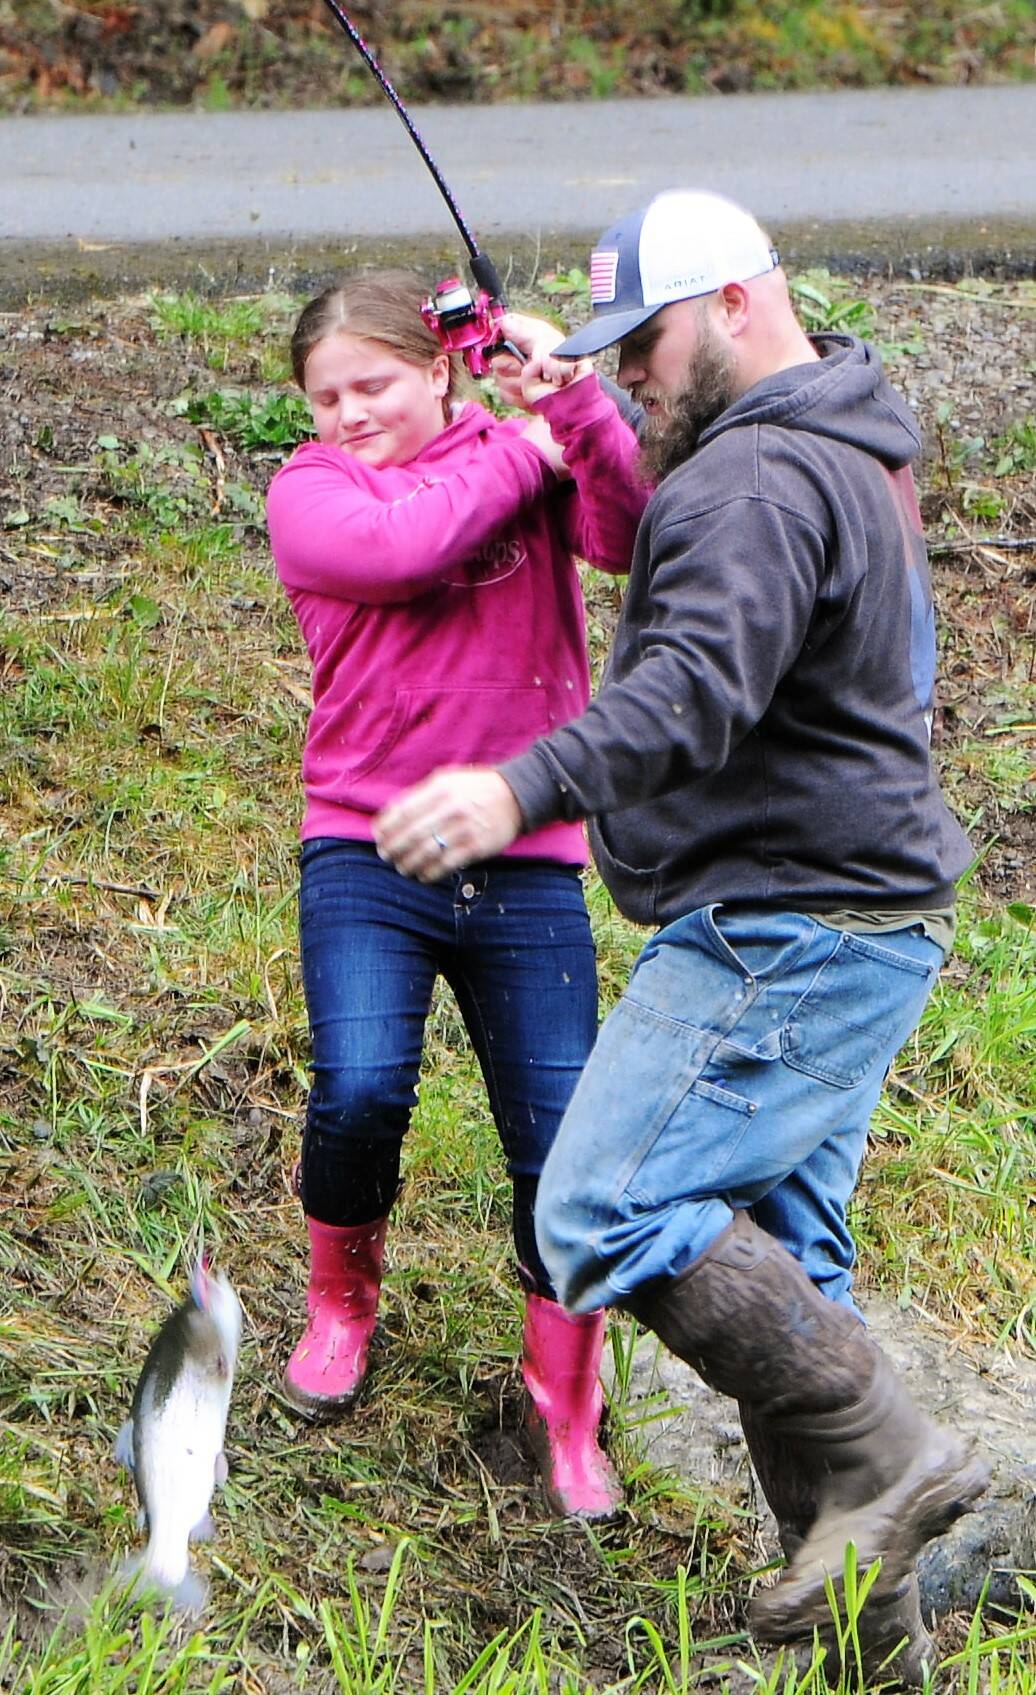 Brynlee Rigby age 8 gets a little help from dad while landing this good-sized trout.